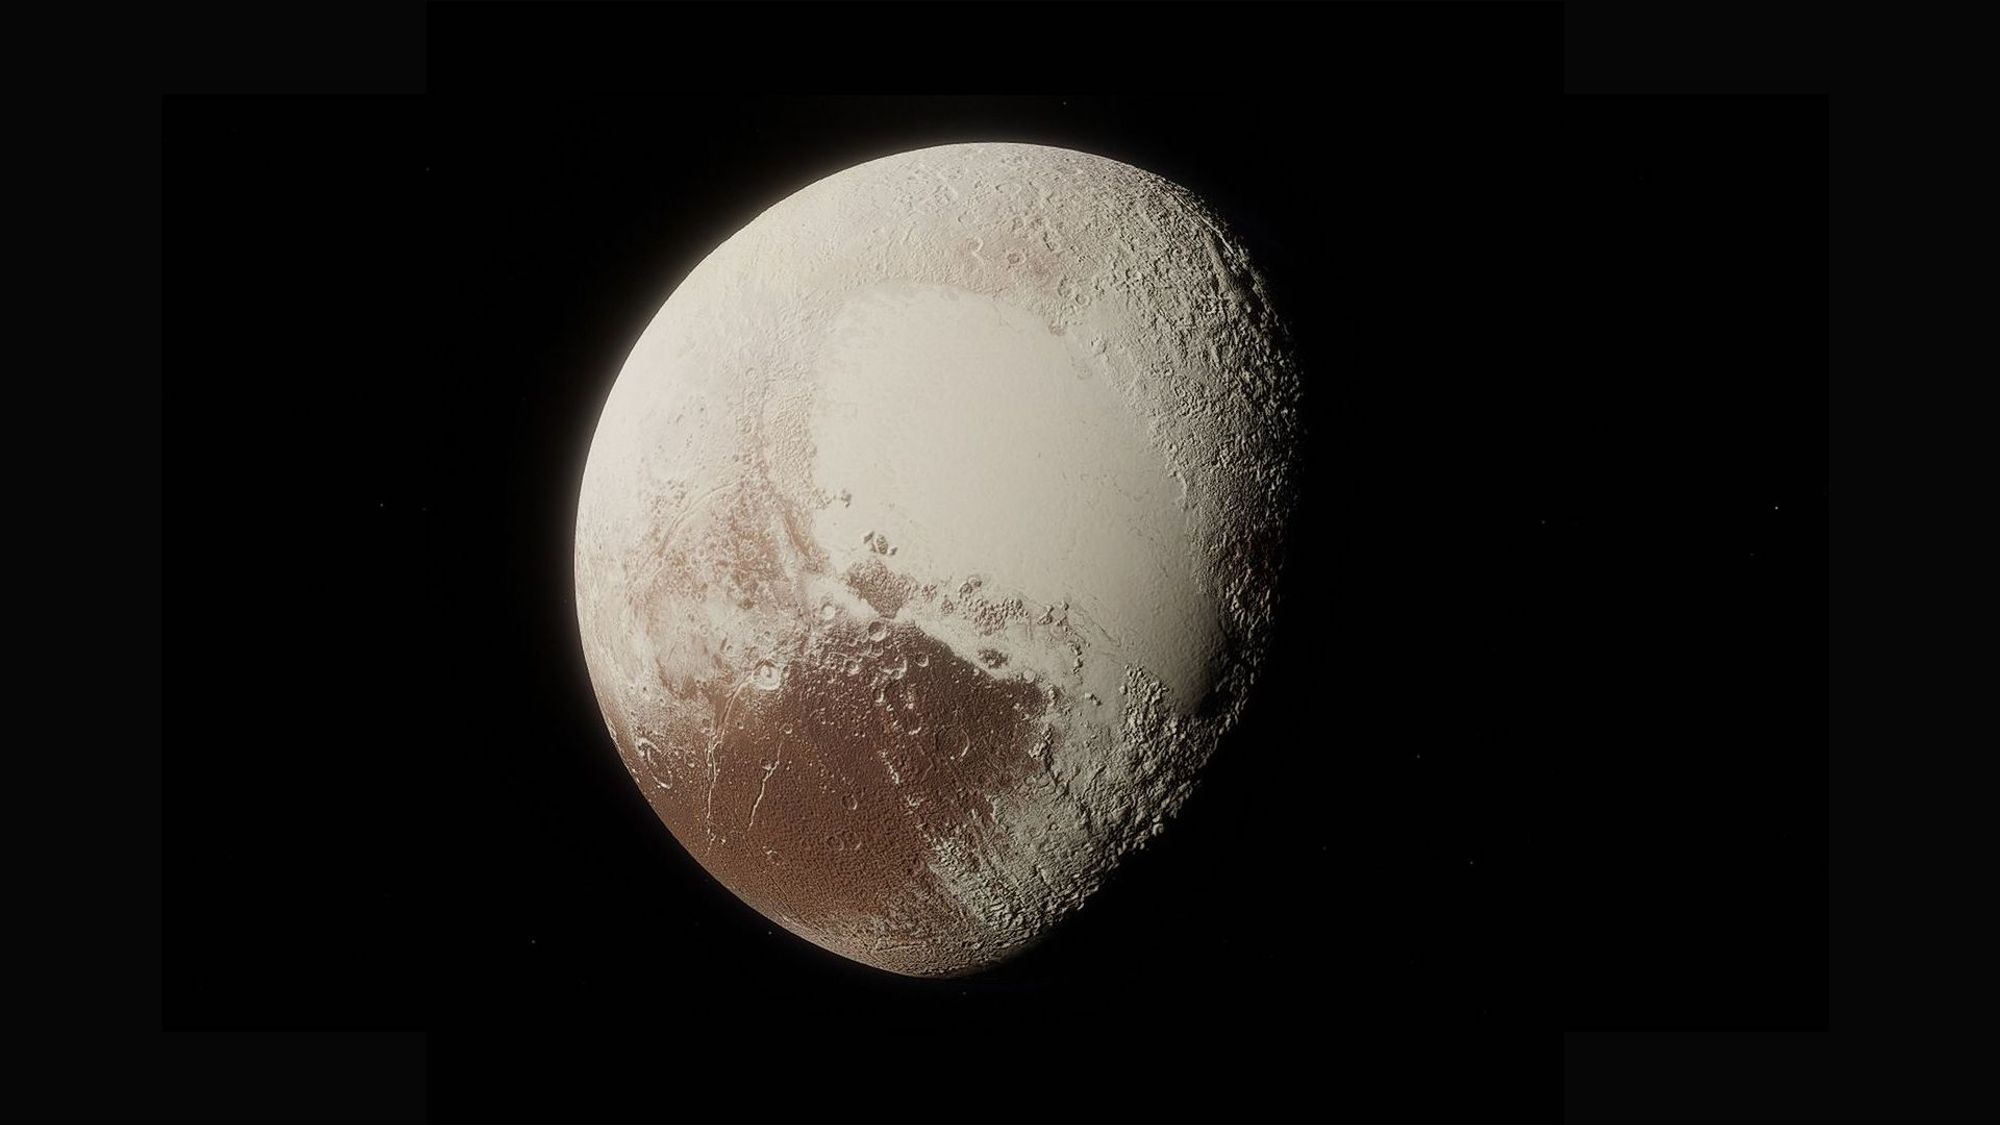 A true color image of the planet Pluto